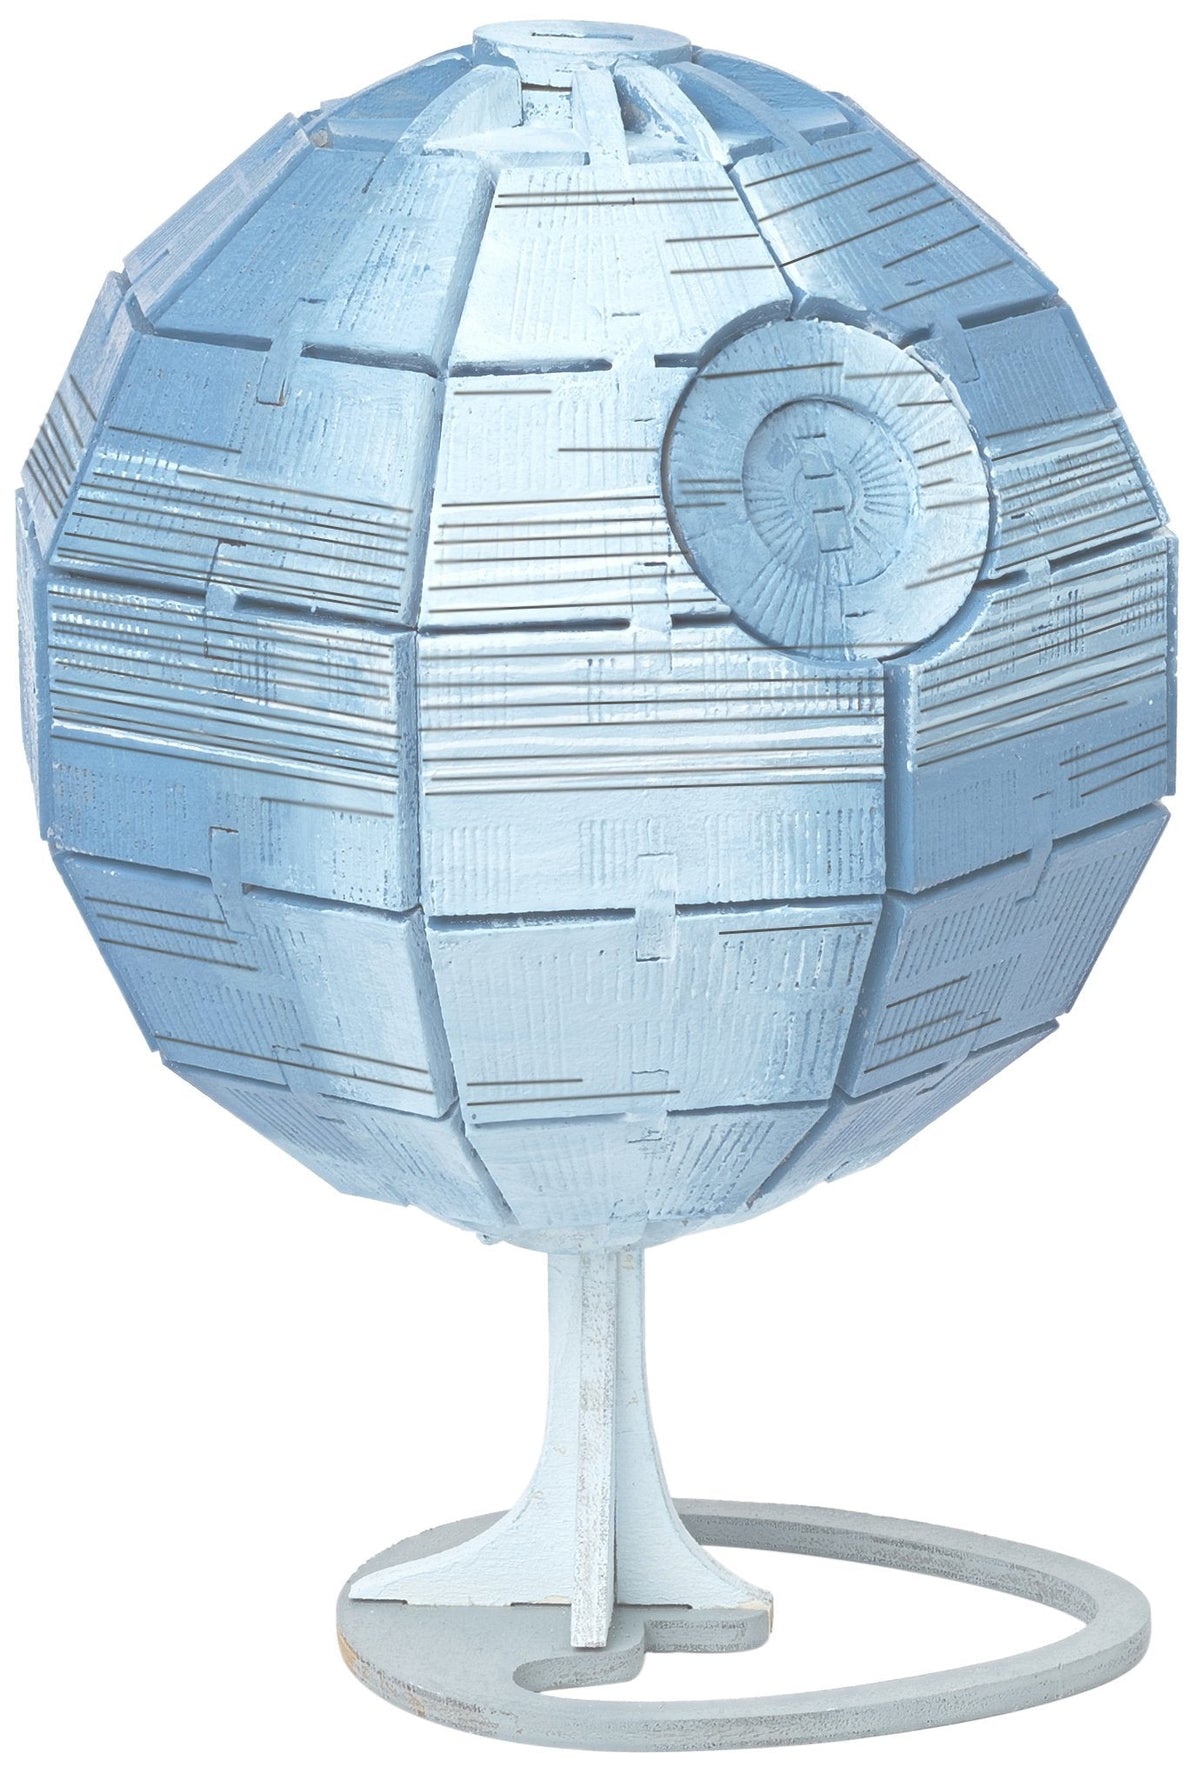 Incredibuilds Star Wars Rogue One Death Star 3D Wood Model